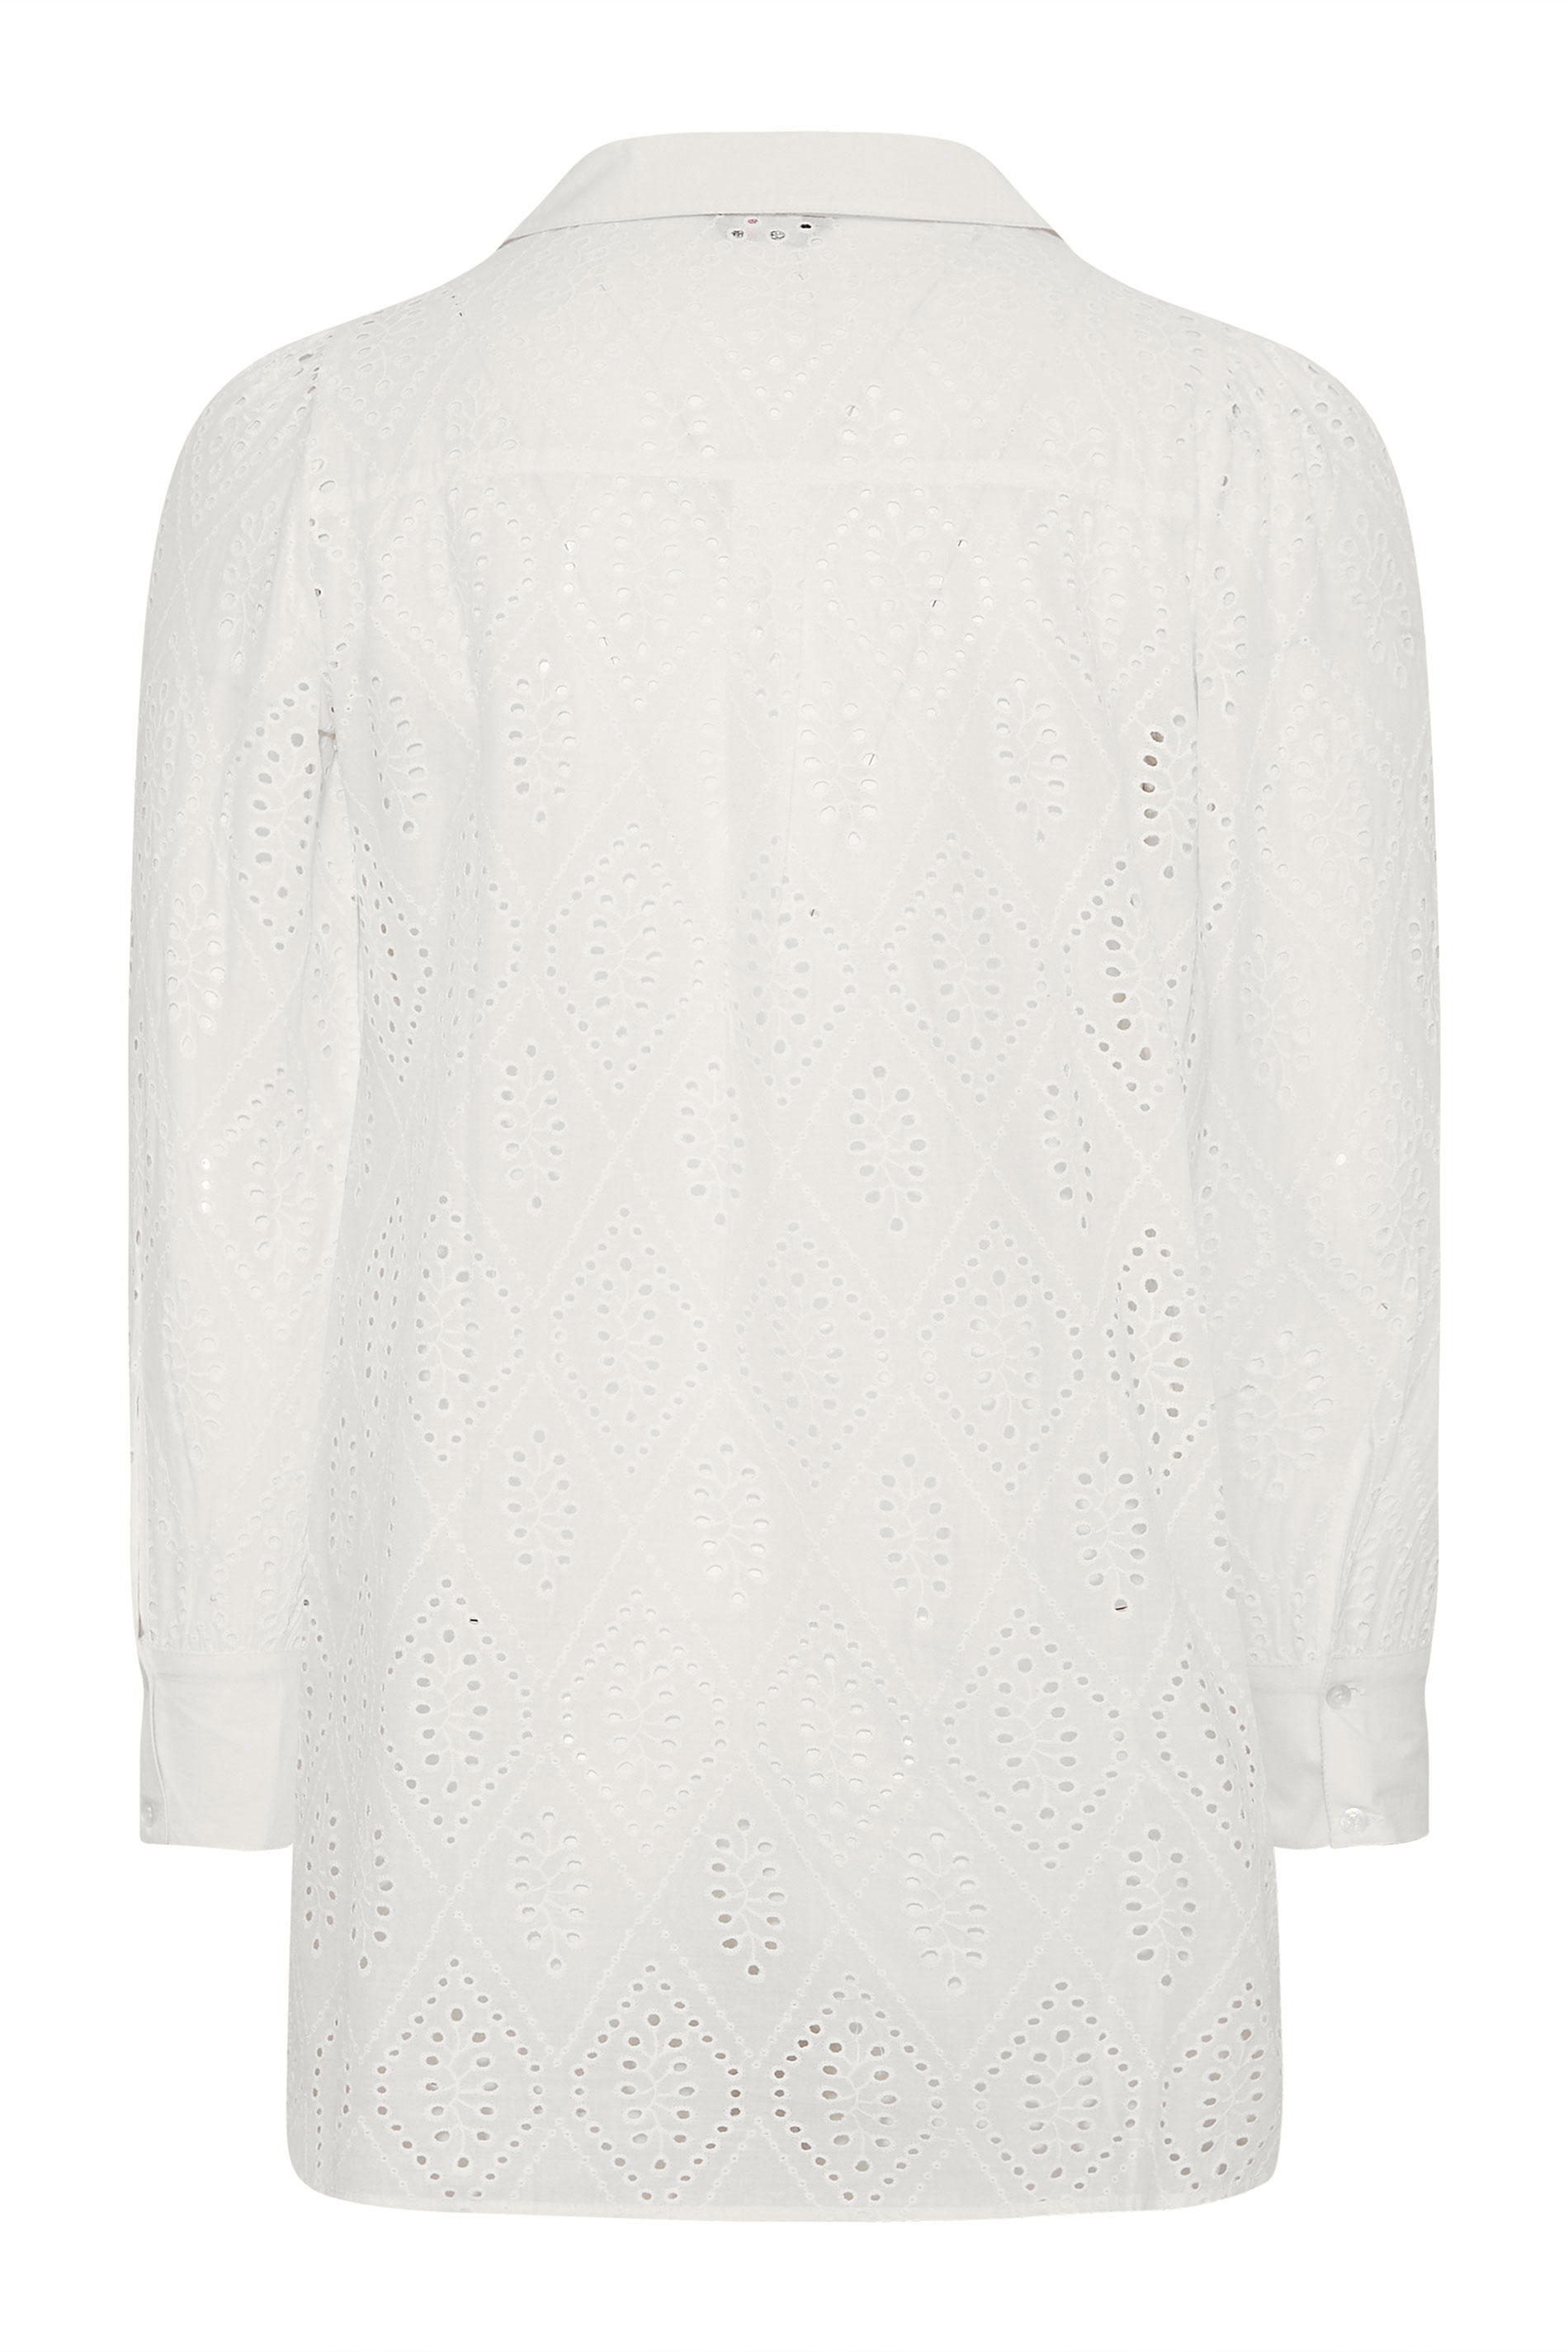 Grande taille  Tops Grande taille  Blouses & Chemisiers | LIMITED COLLECTION - Chemisier Blanc Manches Longues Broderie Anglaise - PI74824